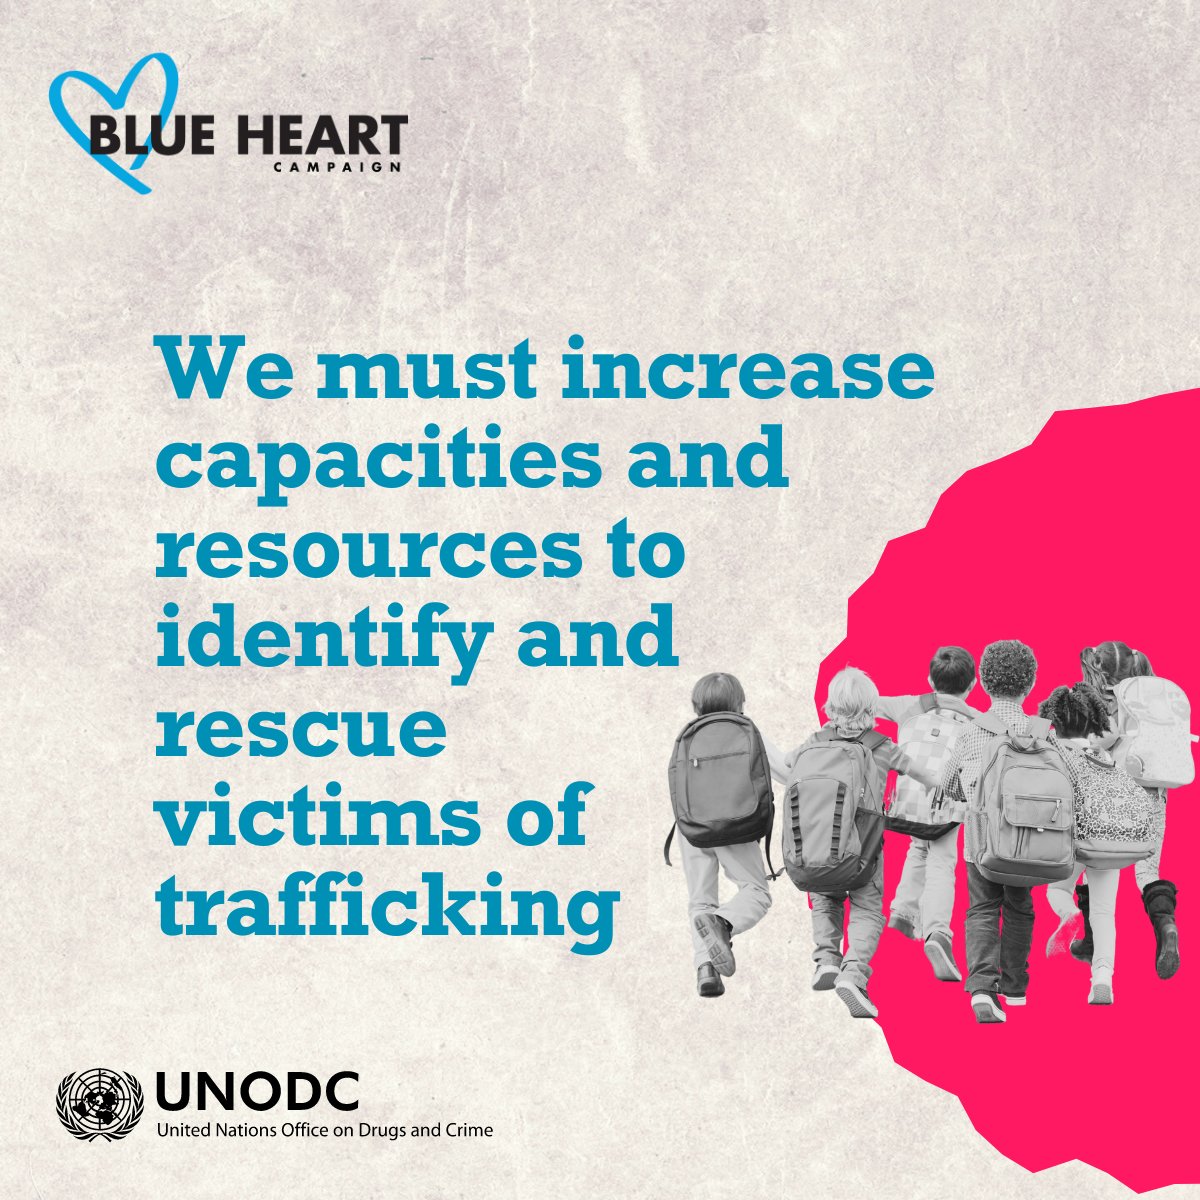 The number of detected trafficking victims globally, has fallen for the first time in 20 years. The issue is as grave as ever, but the crime has become more hidden. States must invest in proactively identifying and rescuing every victim to #LeaveNoOneBehind. #EndHumanTrafficking